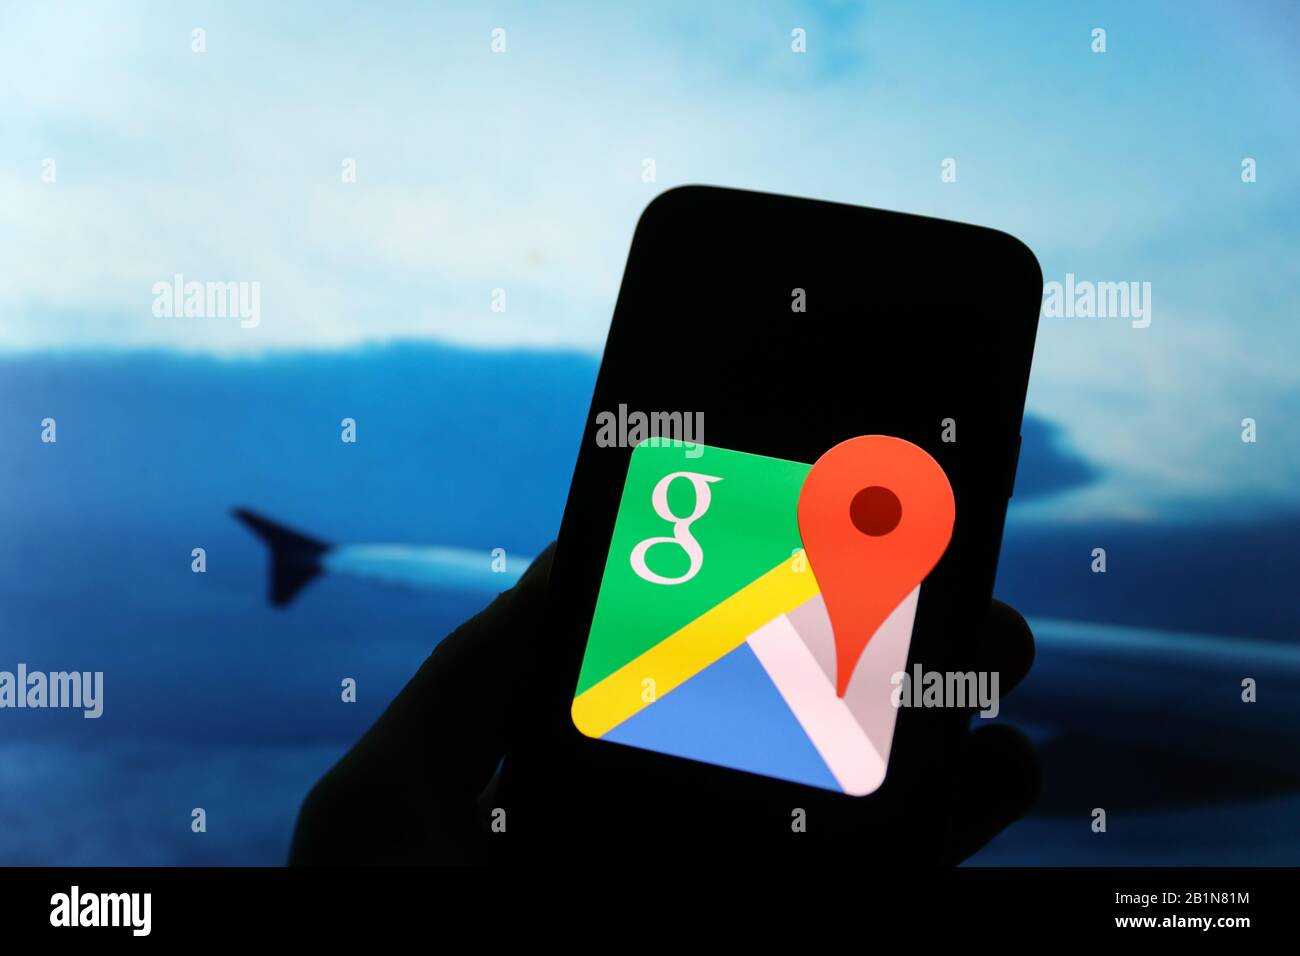 Google logo seen displayed on smart phone screen with a view from the airplane and an airplane wing visible blurred in the background Stock Photo